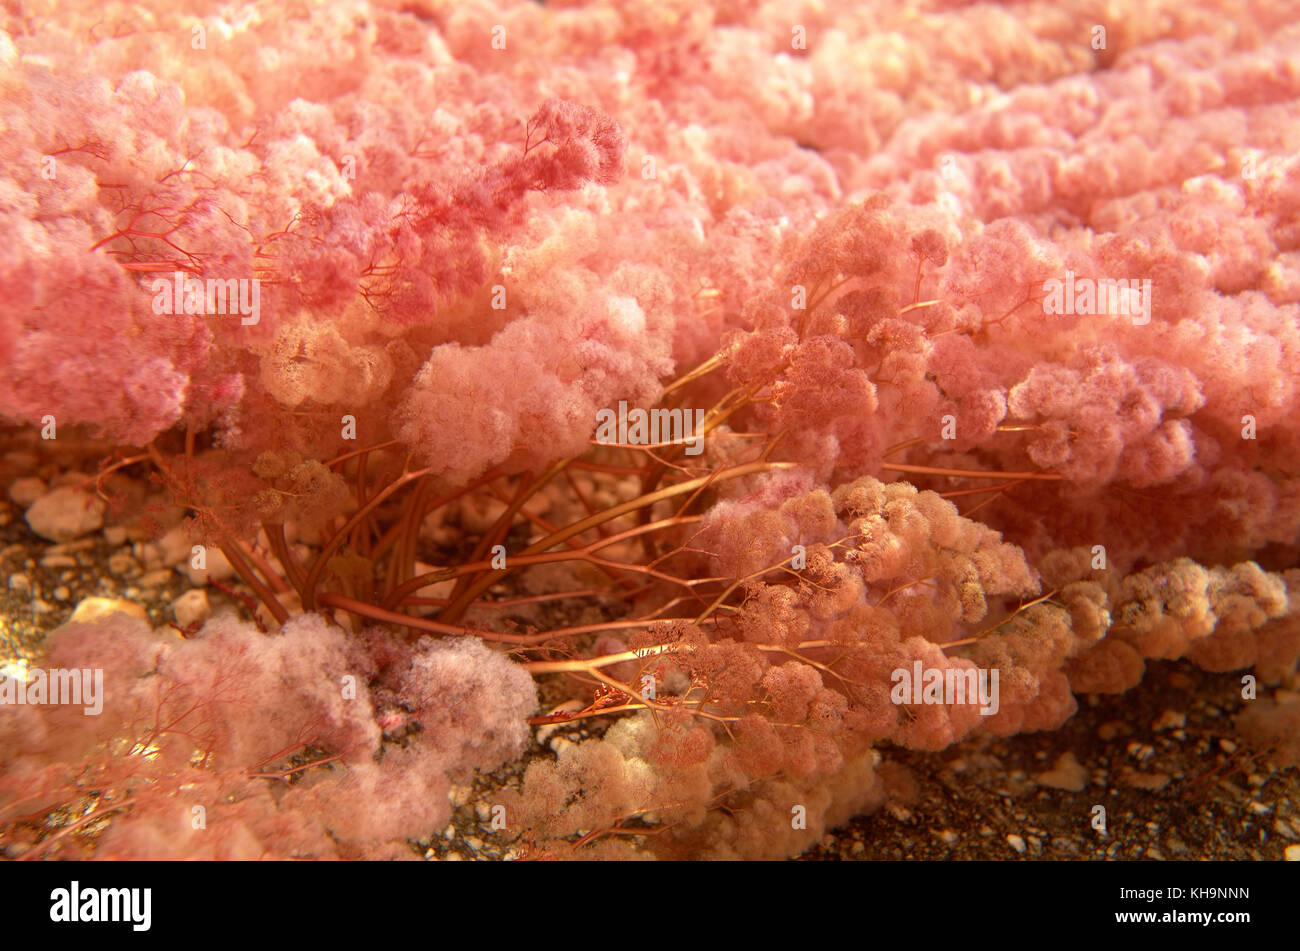 Rhyncholacis clavigera in pale pink form Stock Photo